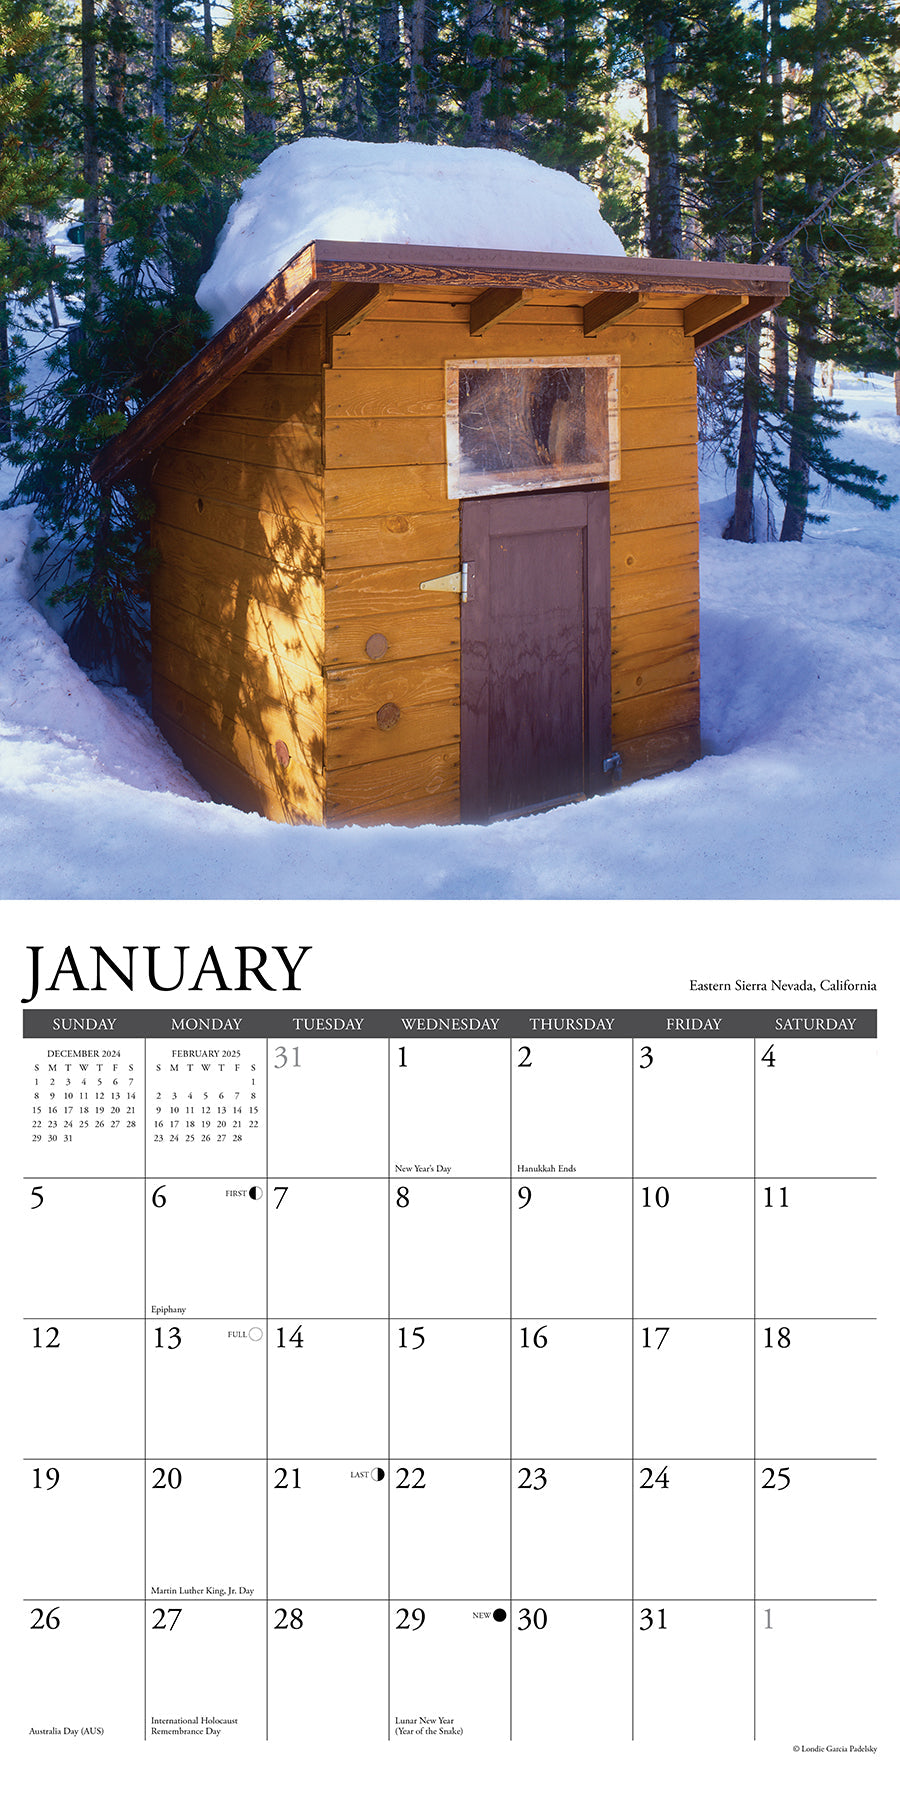 2025 Outhouses - Square Wall Calendar